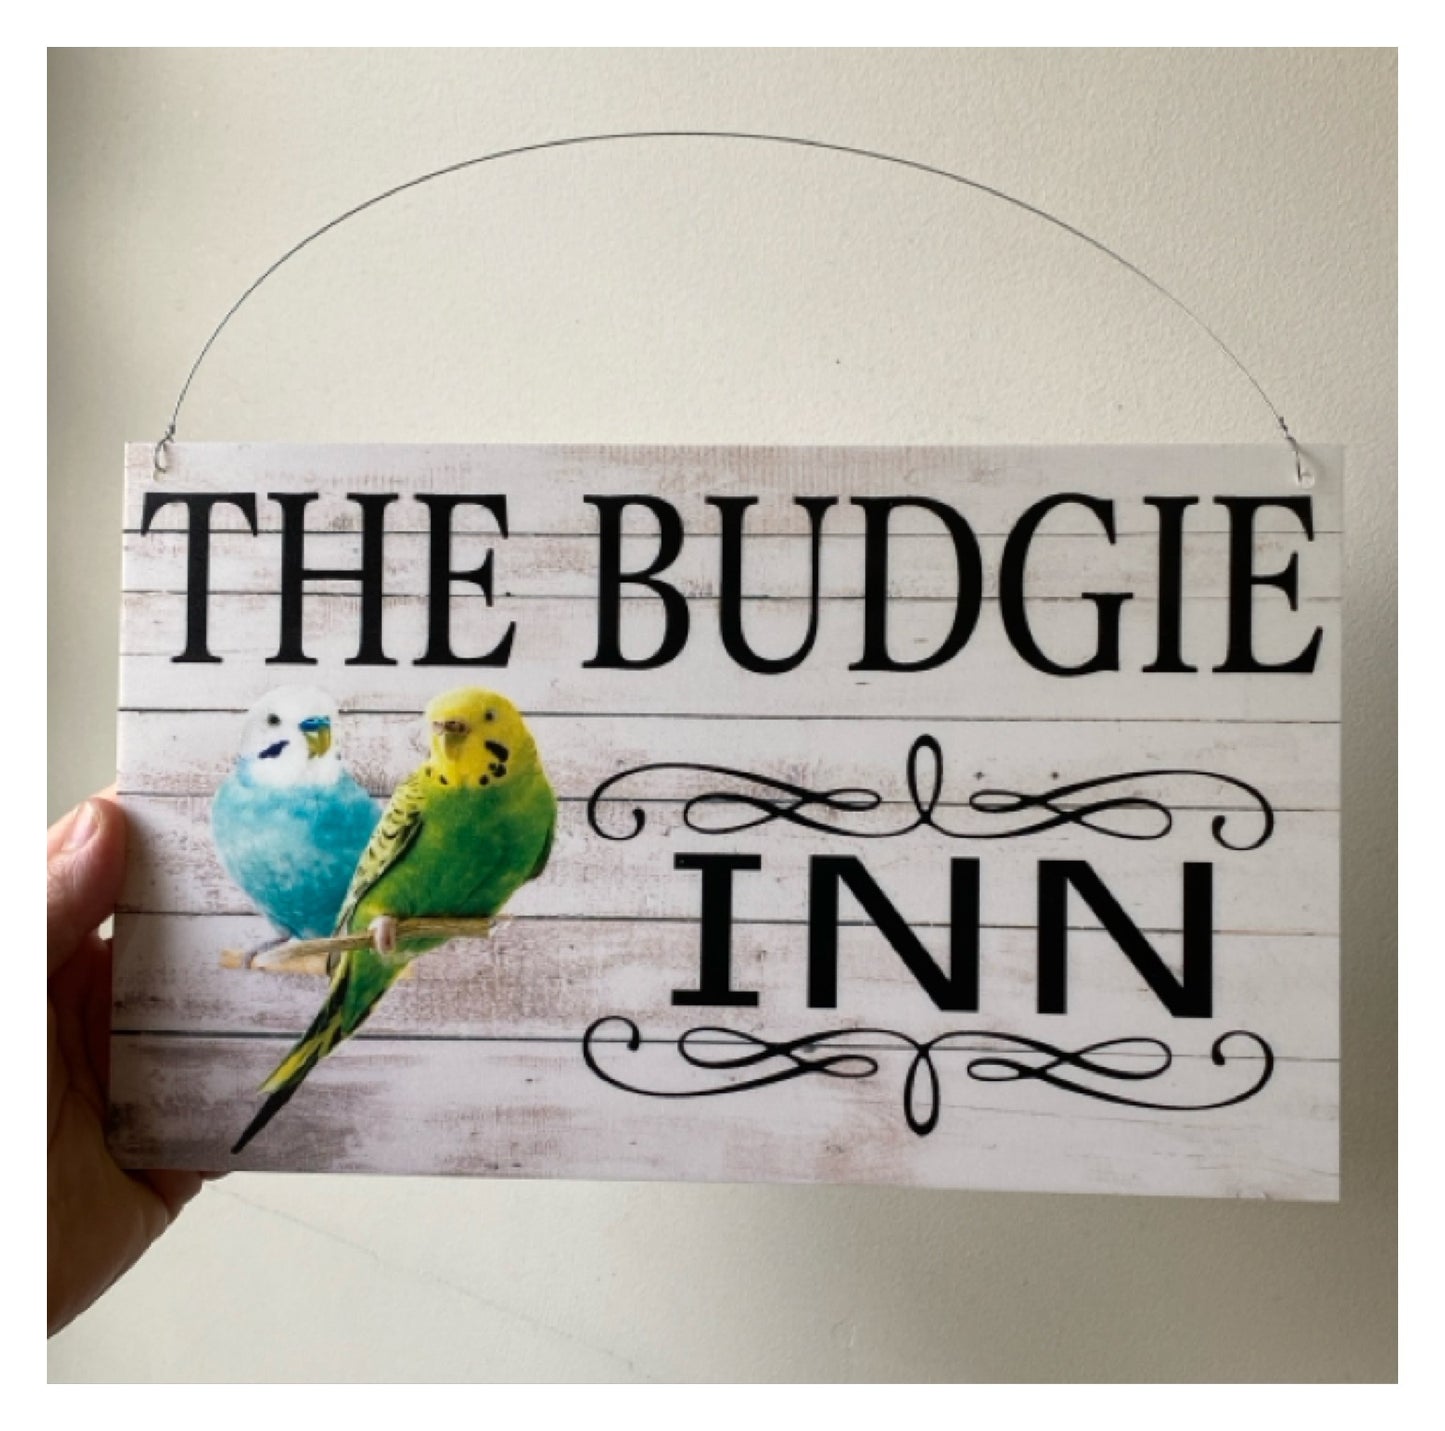 The Budgie Bird Inn Sign - The Renmy Store Homewares & Gifts 